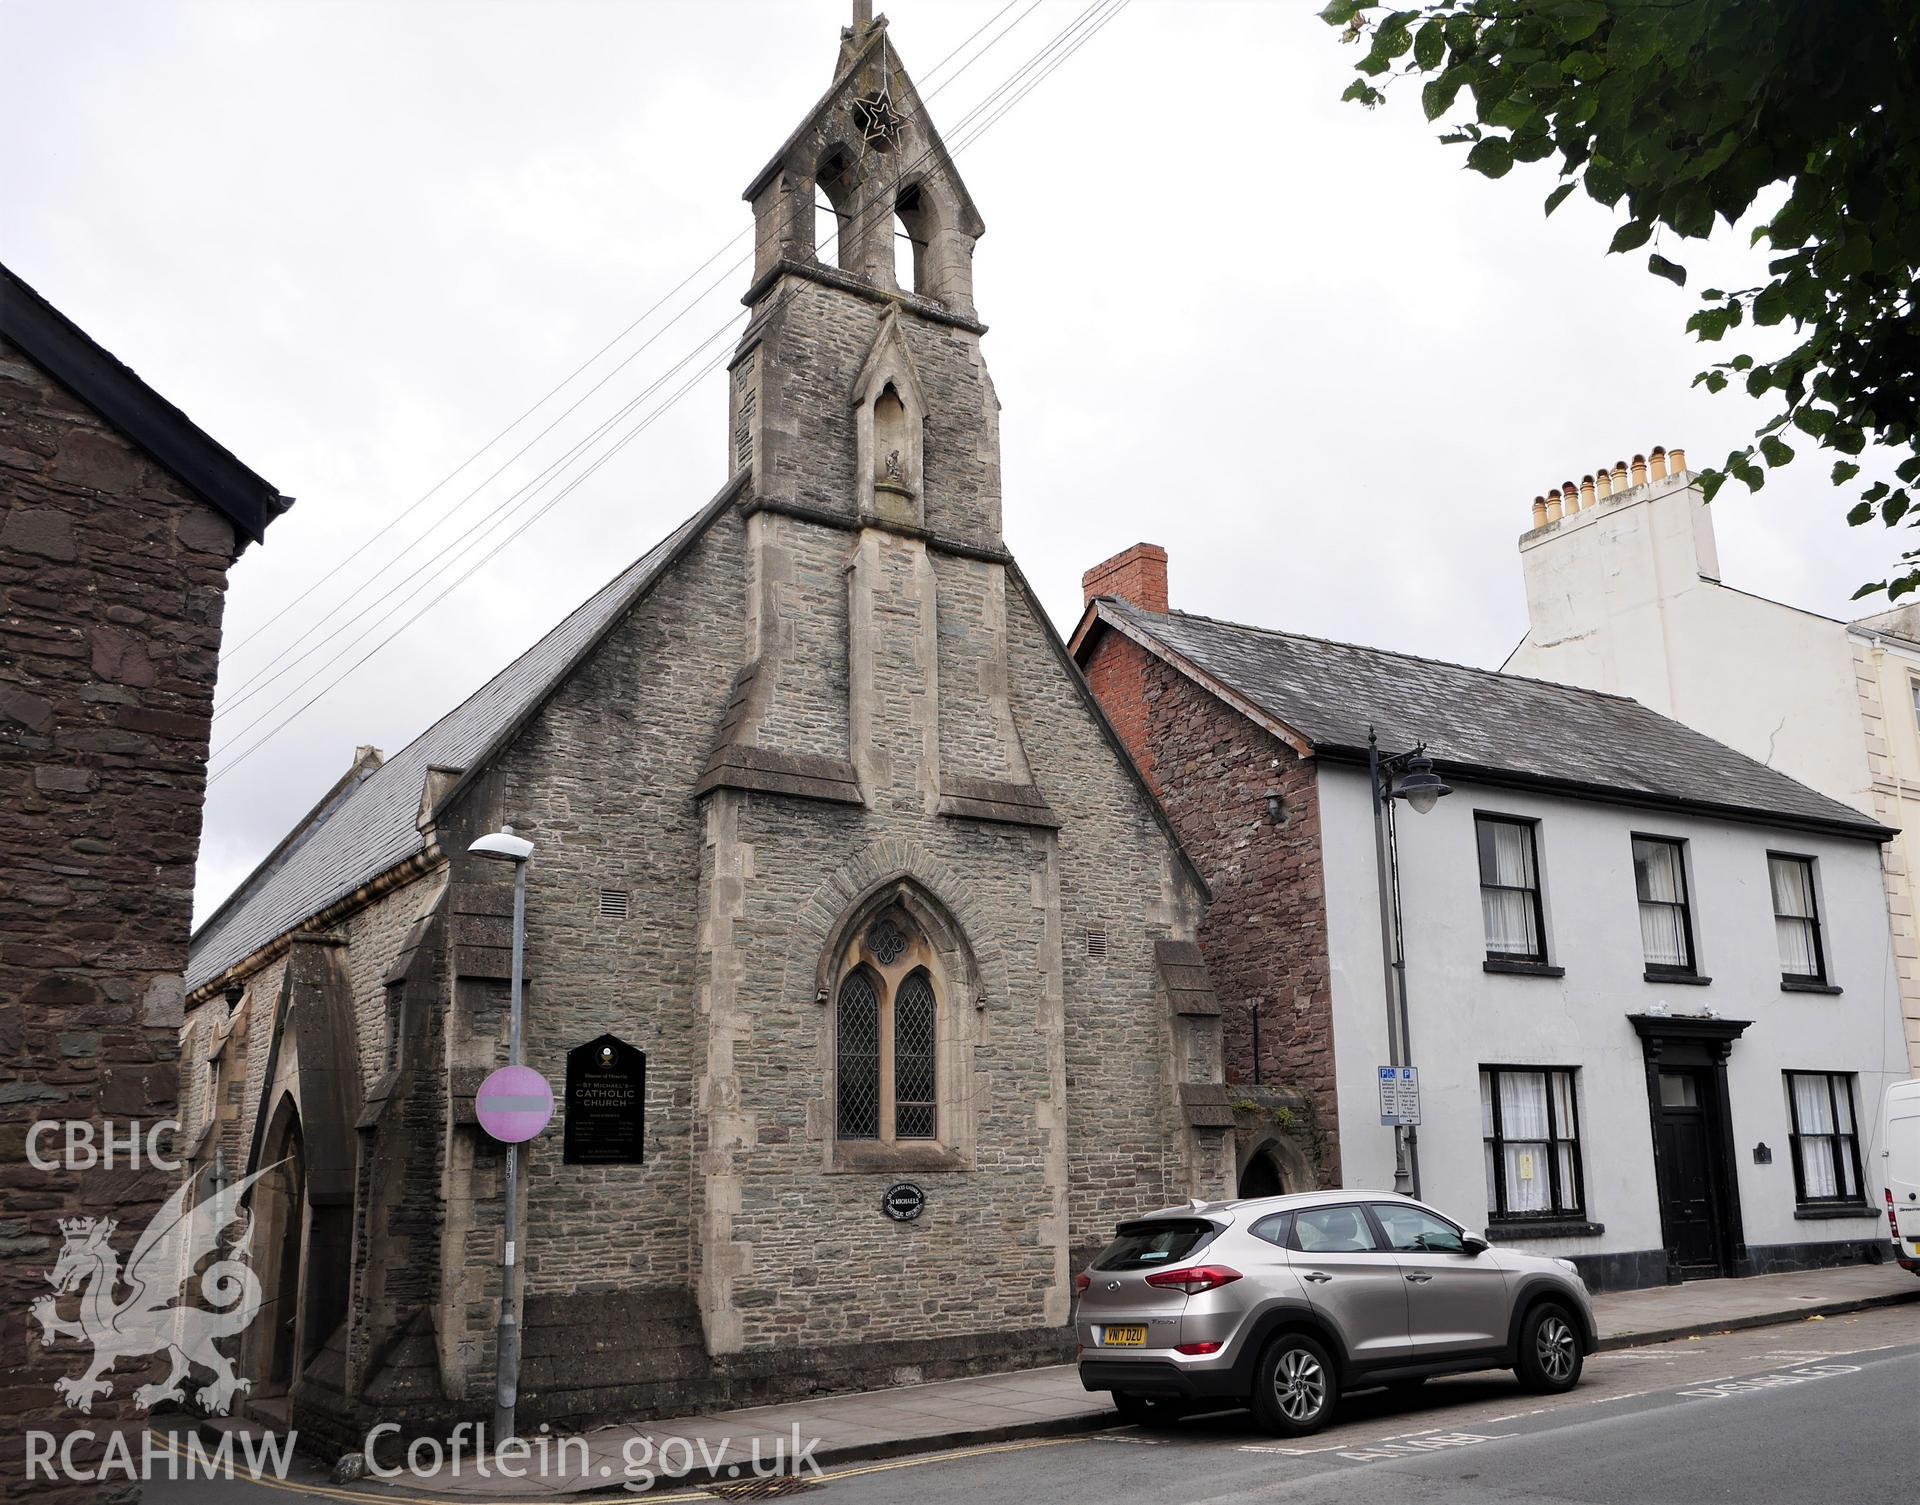 Digital colour photograph showing exterior of St Michael's Catholic church, Brecon.